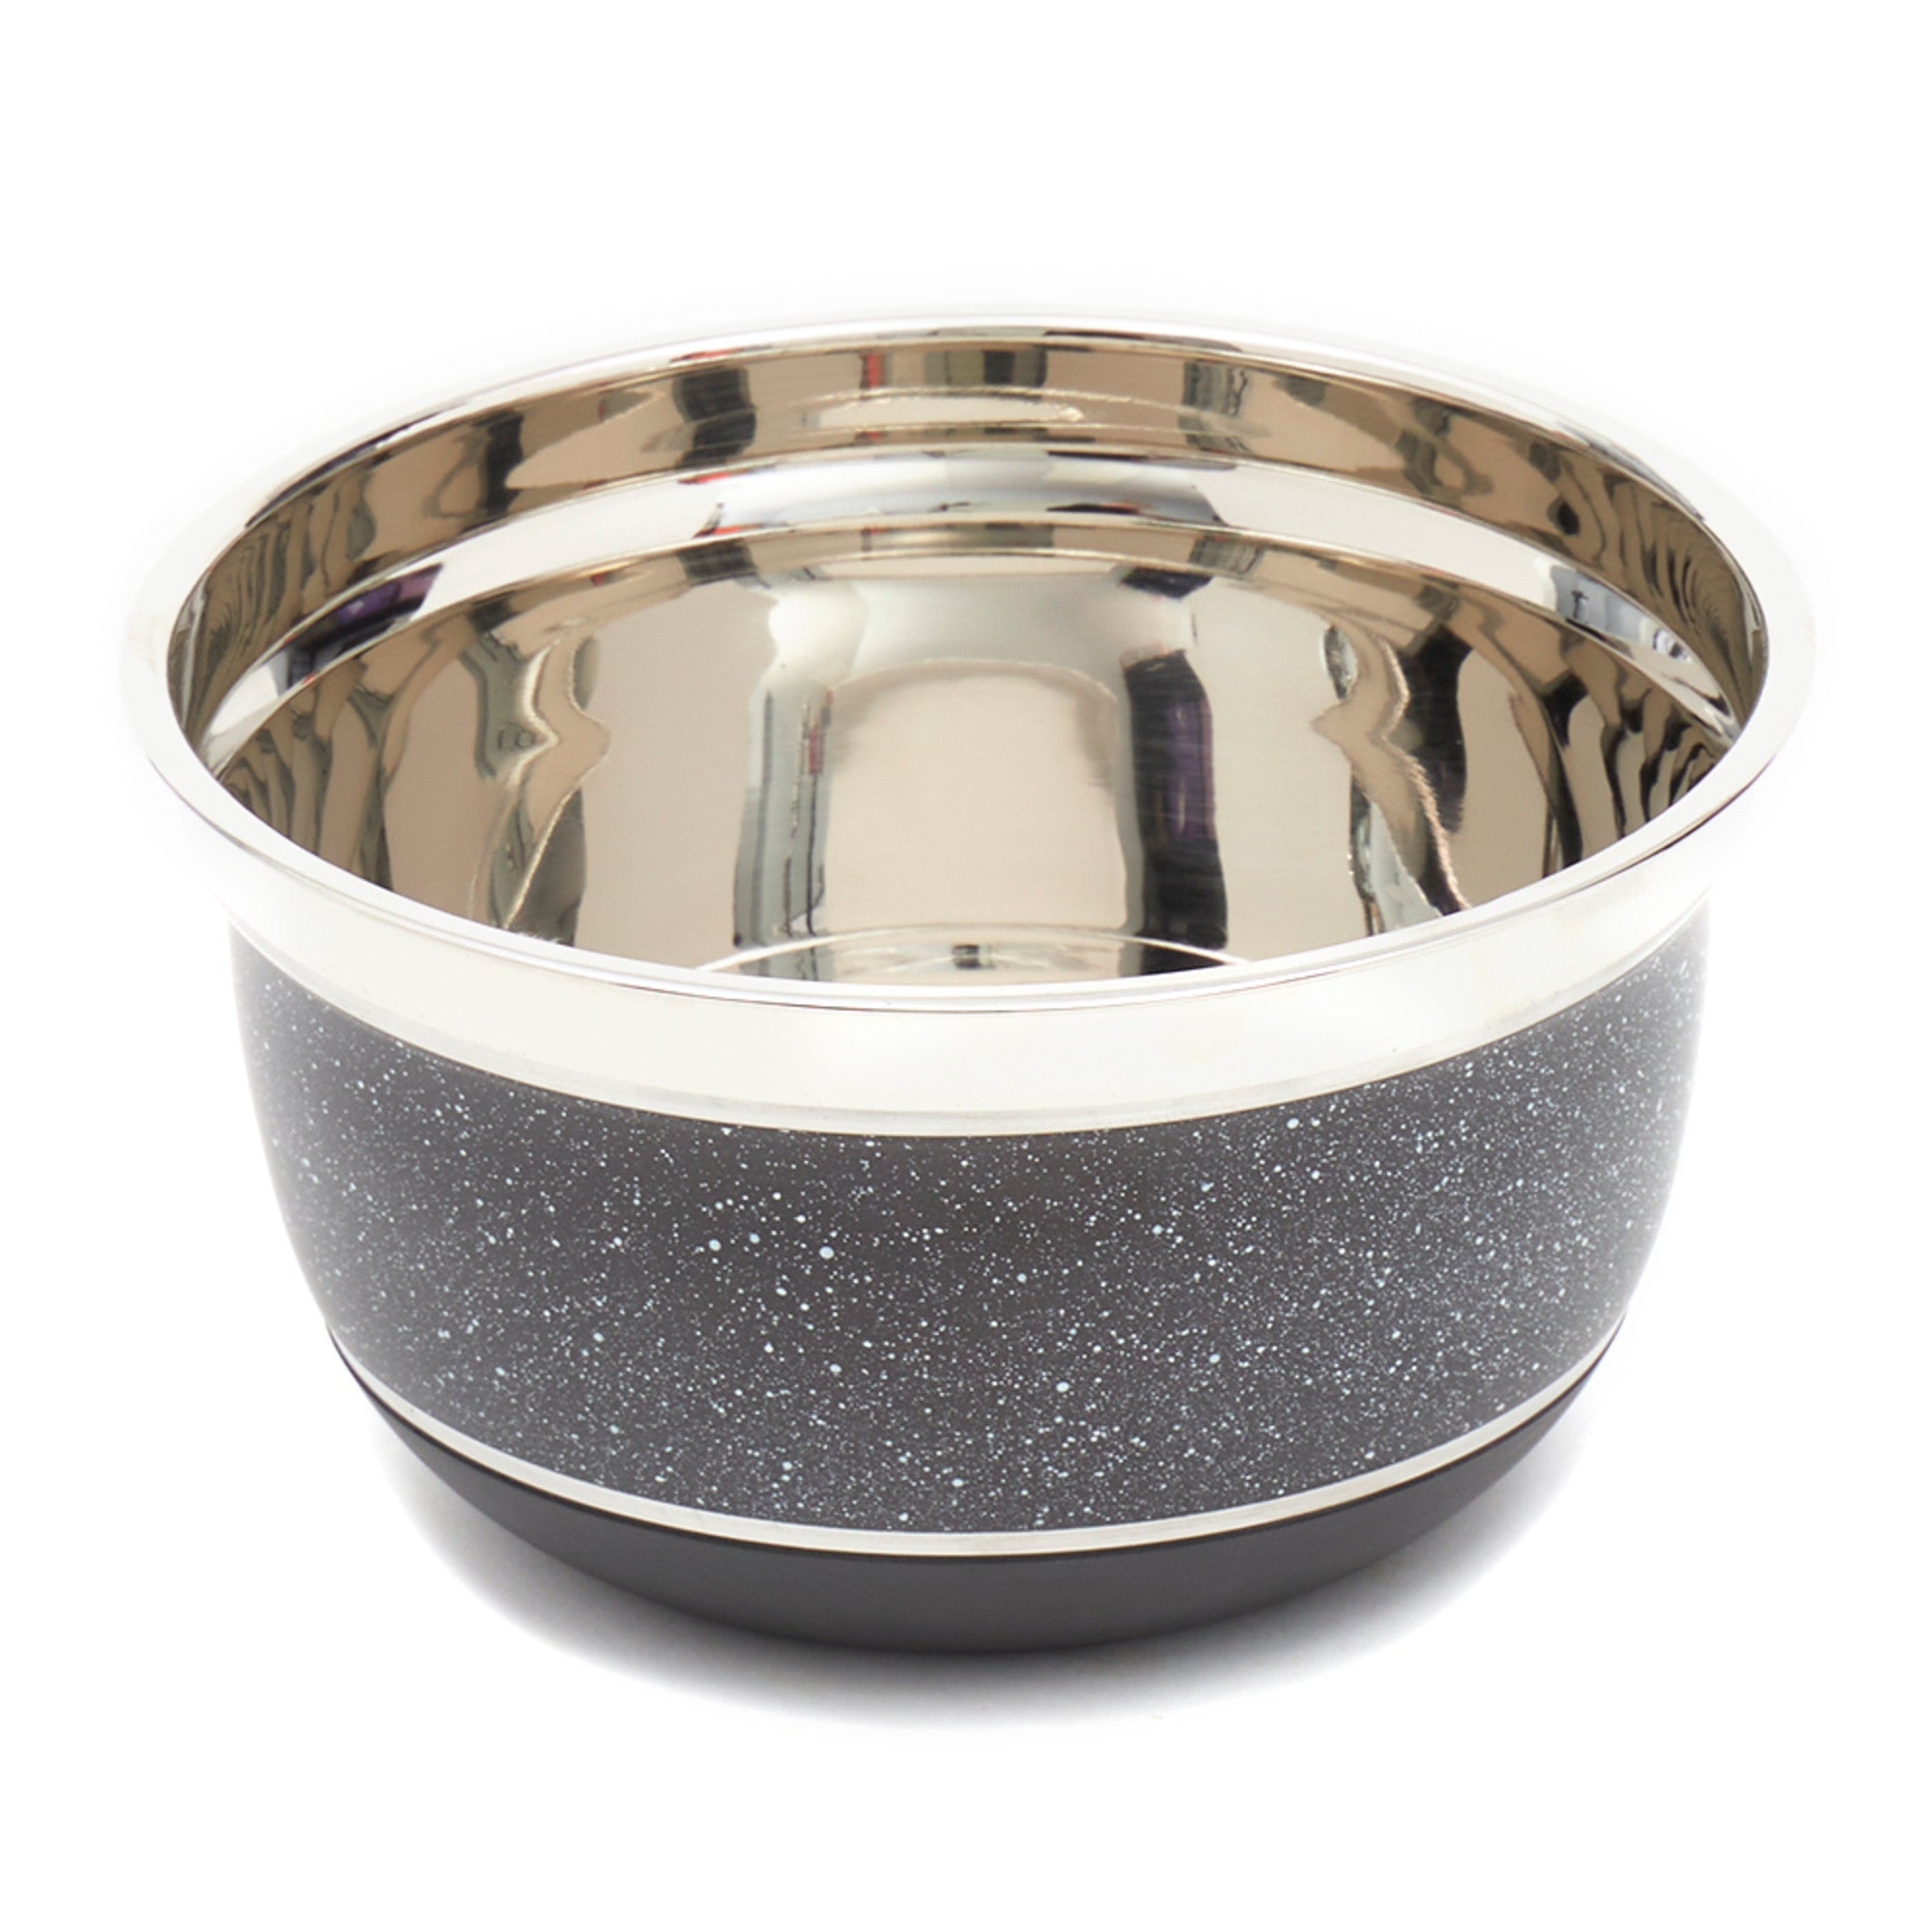 Home Basics Speckled 1.5 Qt Stainless Steel Mixing Bowl with Non-Skid Bottom - Assorted Colors